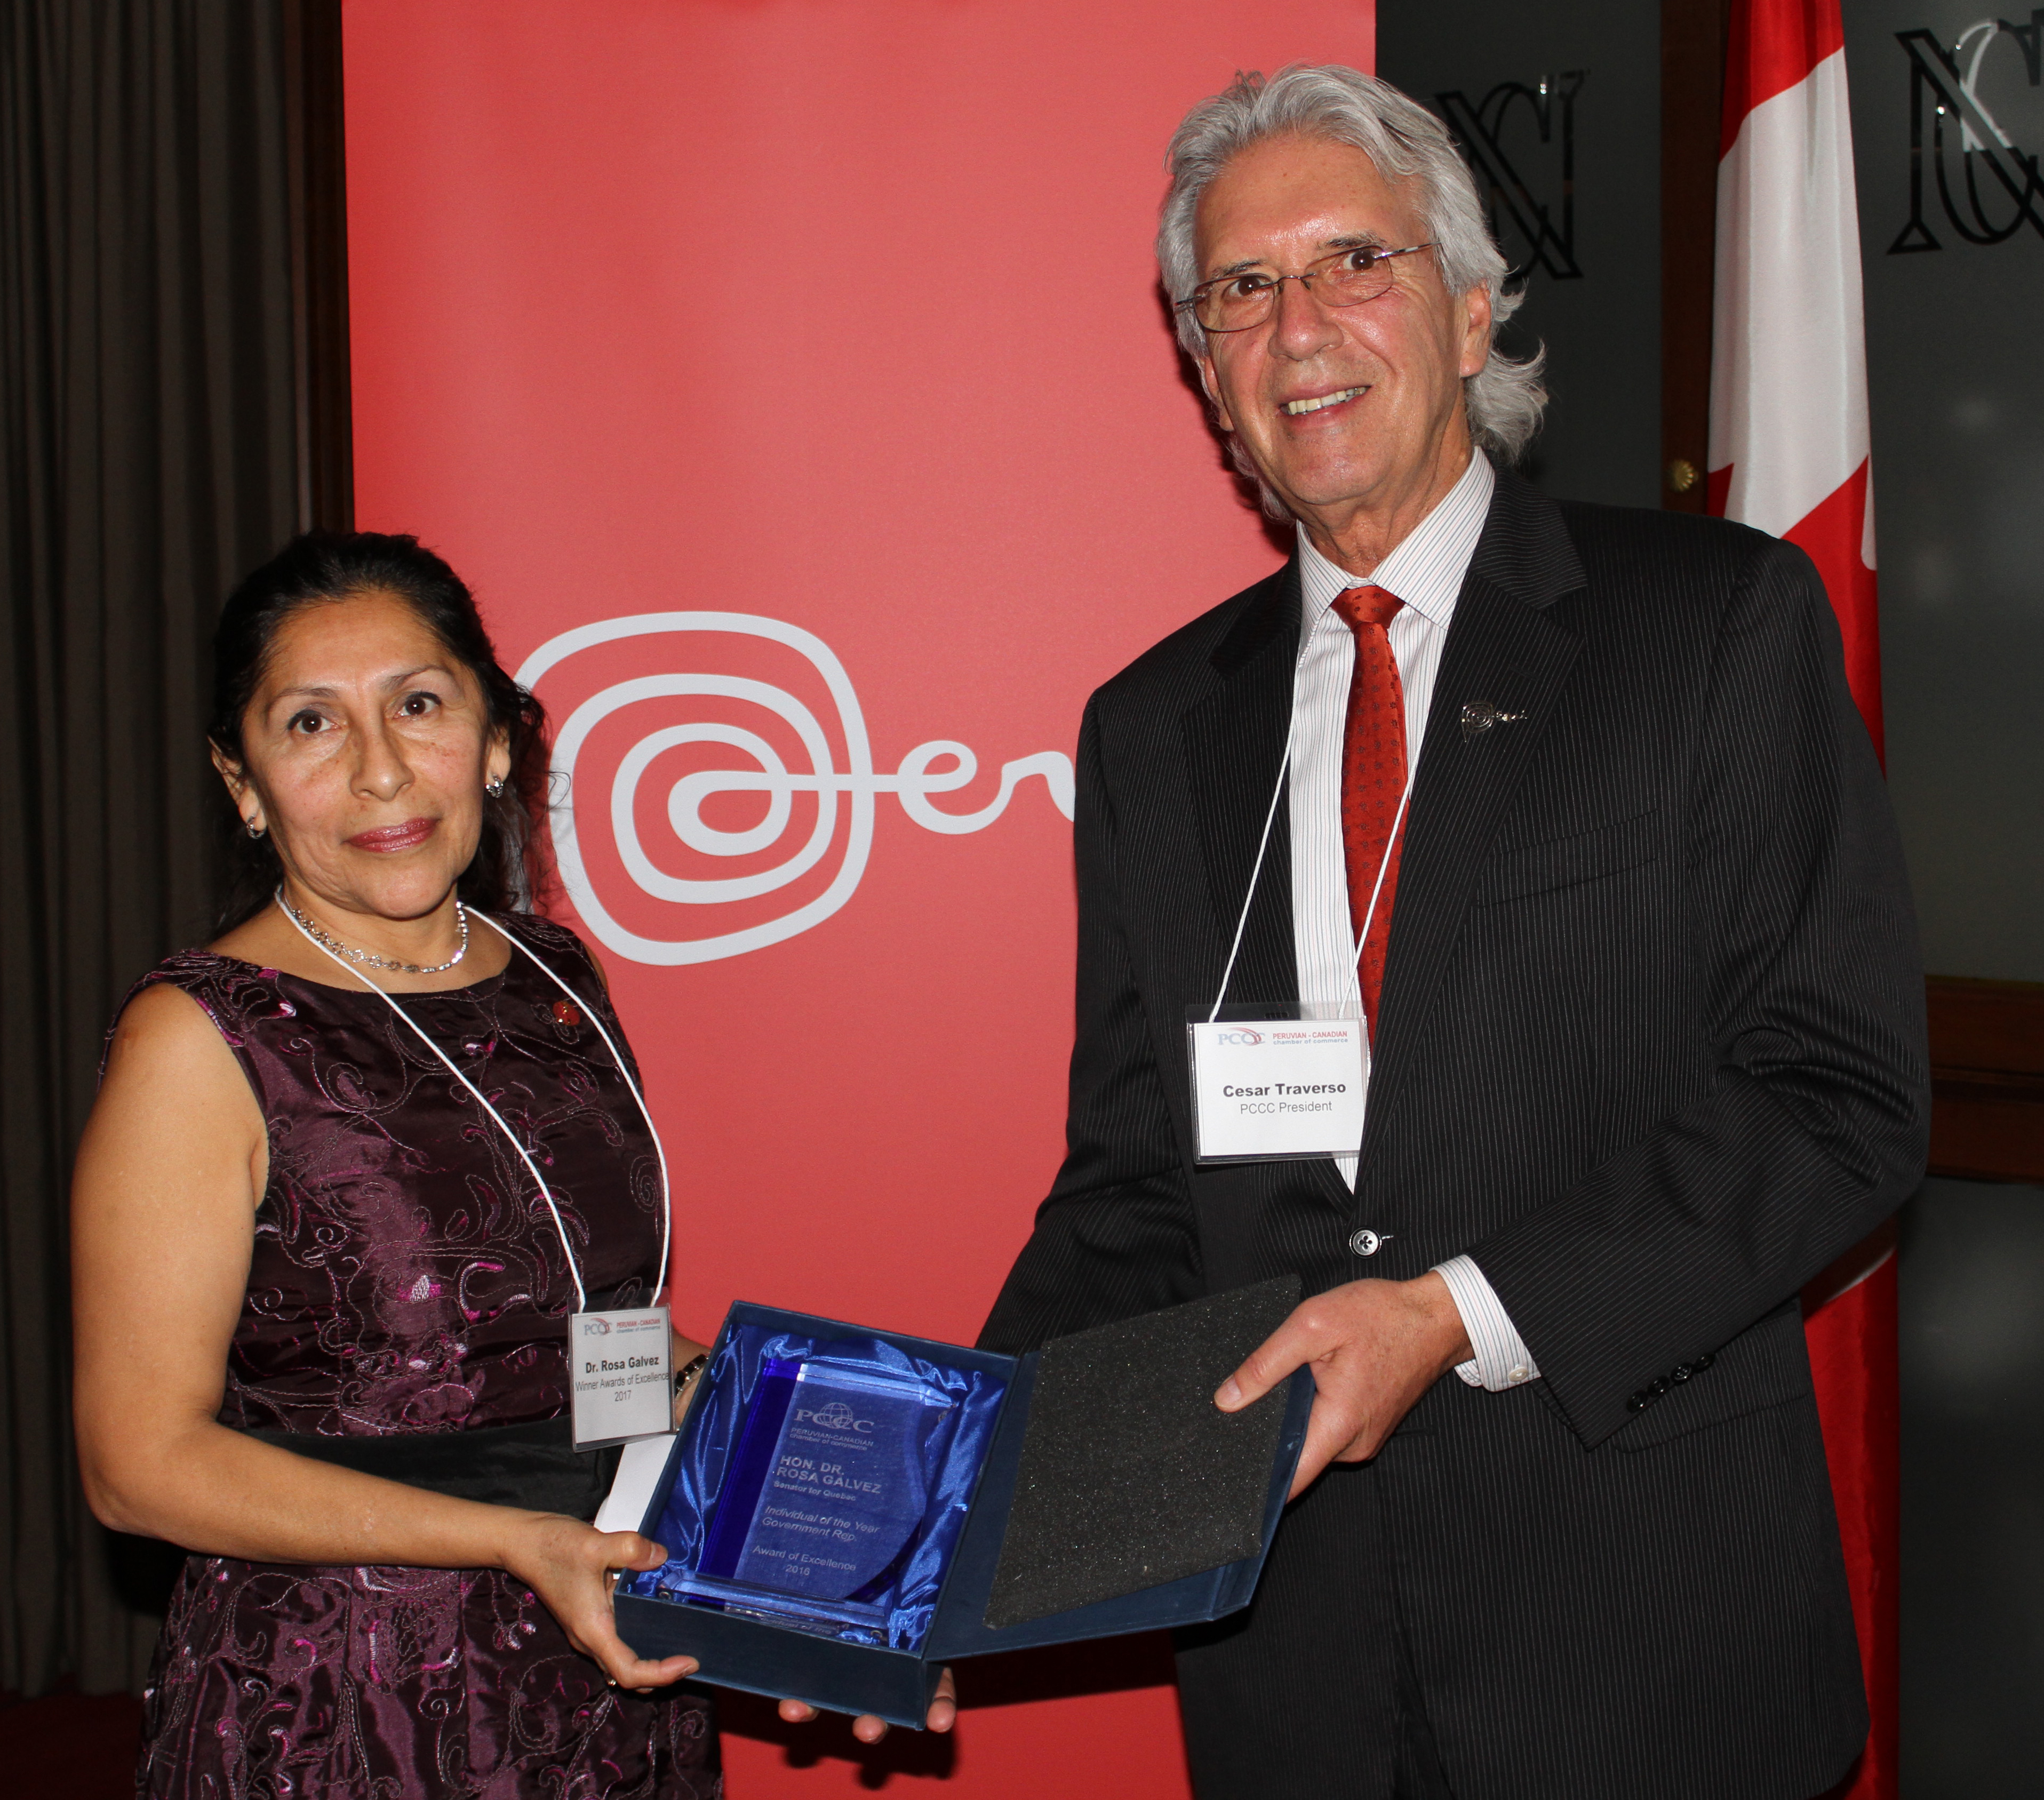 Senator Galvez receives the award for Individual of the Year from Cesar Traverso former director of the Peruvian-Canadian Chamber of Commerce, February 23, 2017.